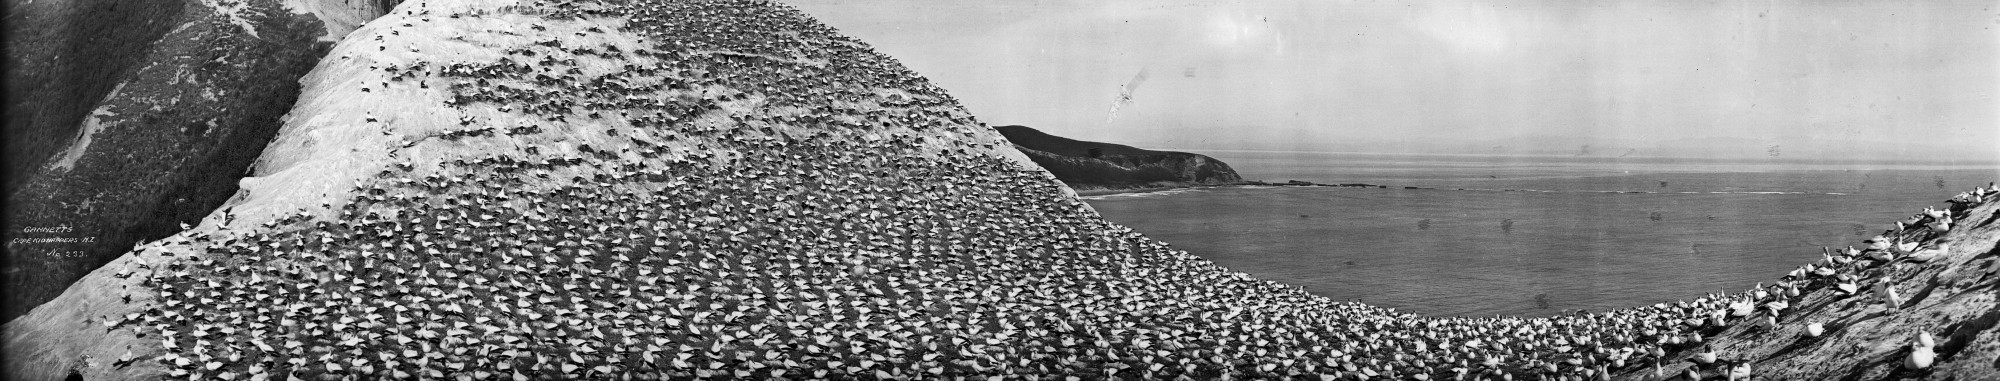 Gannets, Cape Kidnappers, New Zealand, 1923-1928 (3057756872)